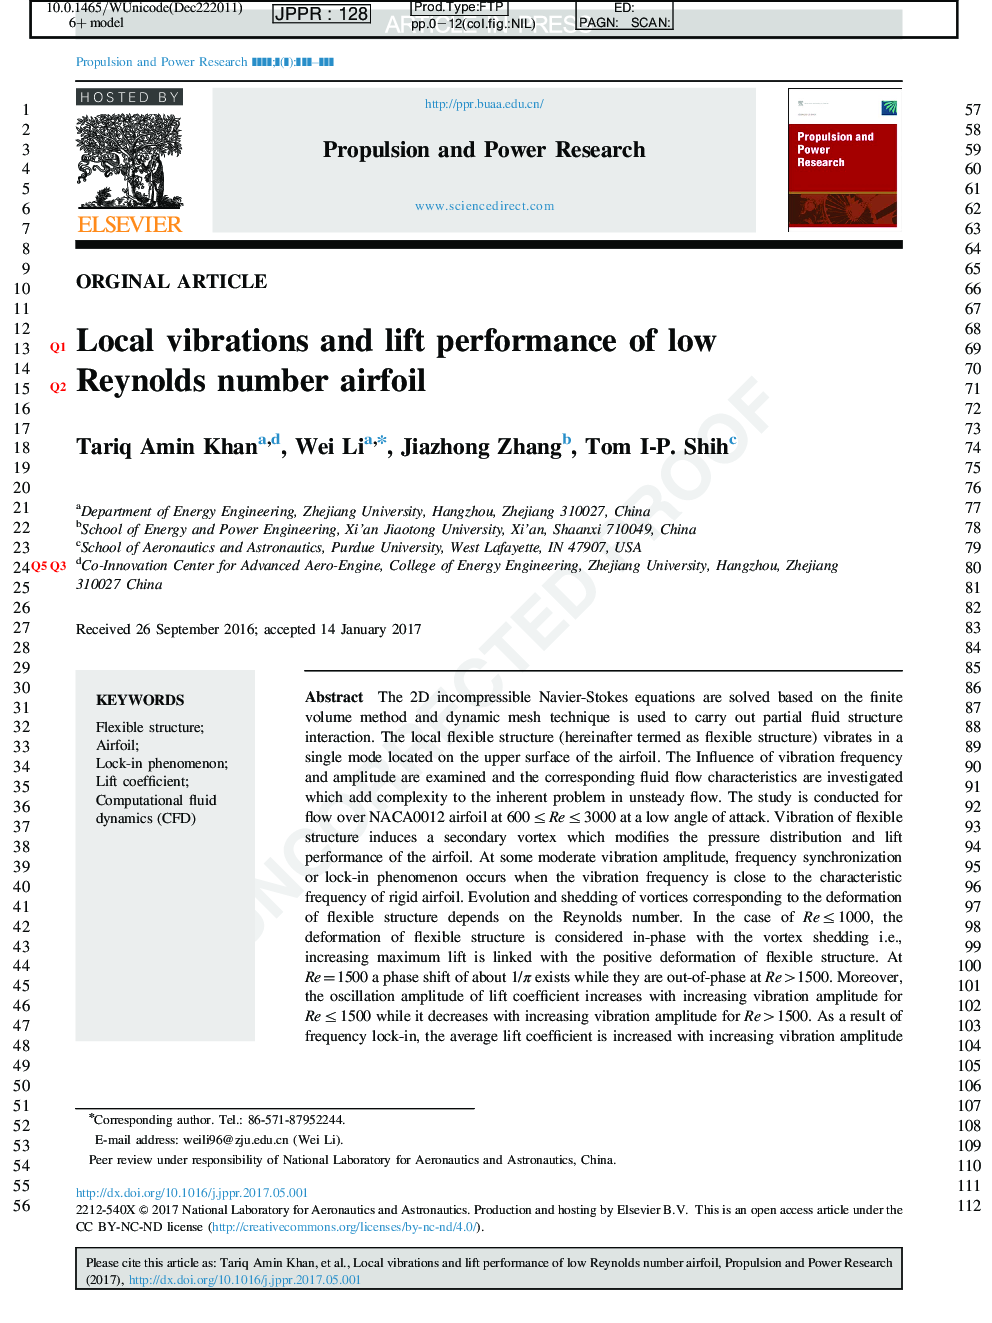 Local vibrations and lift performance of low Reynolds number airfoil